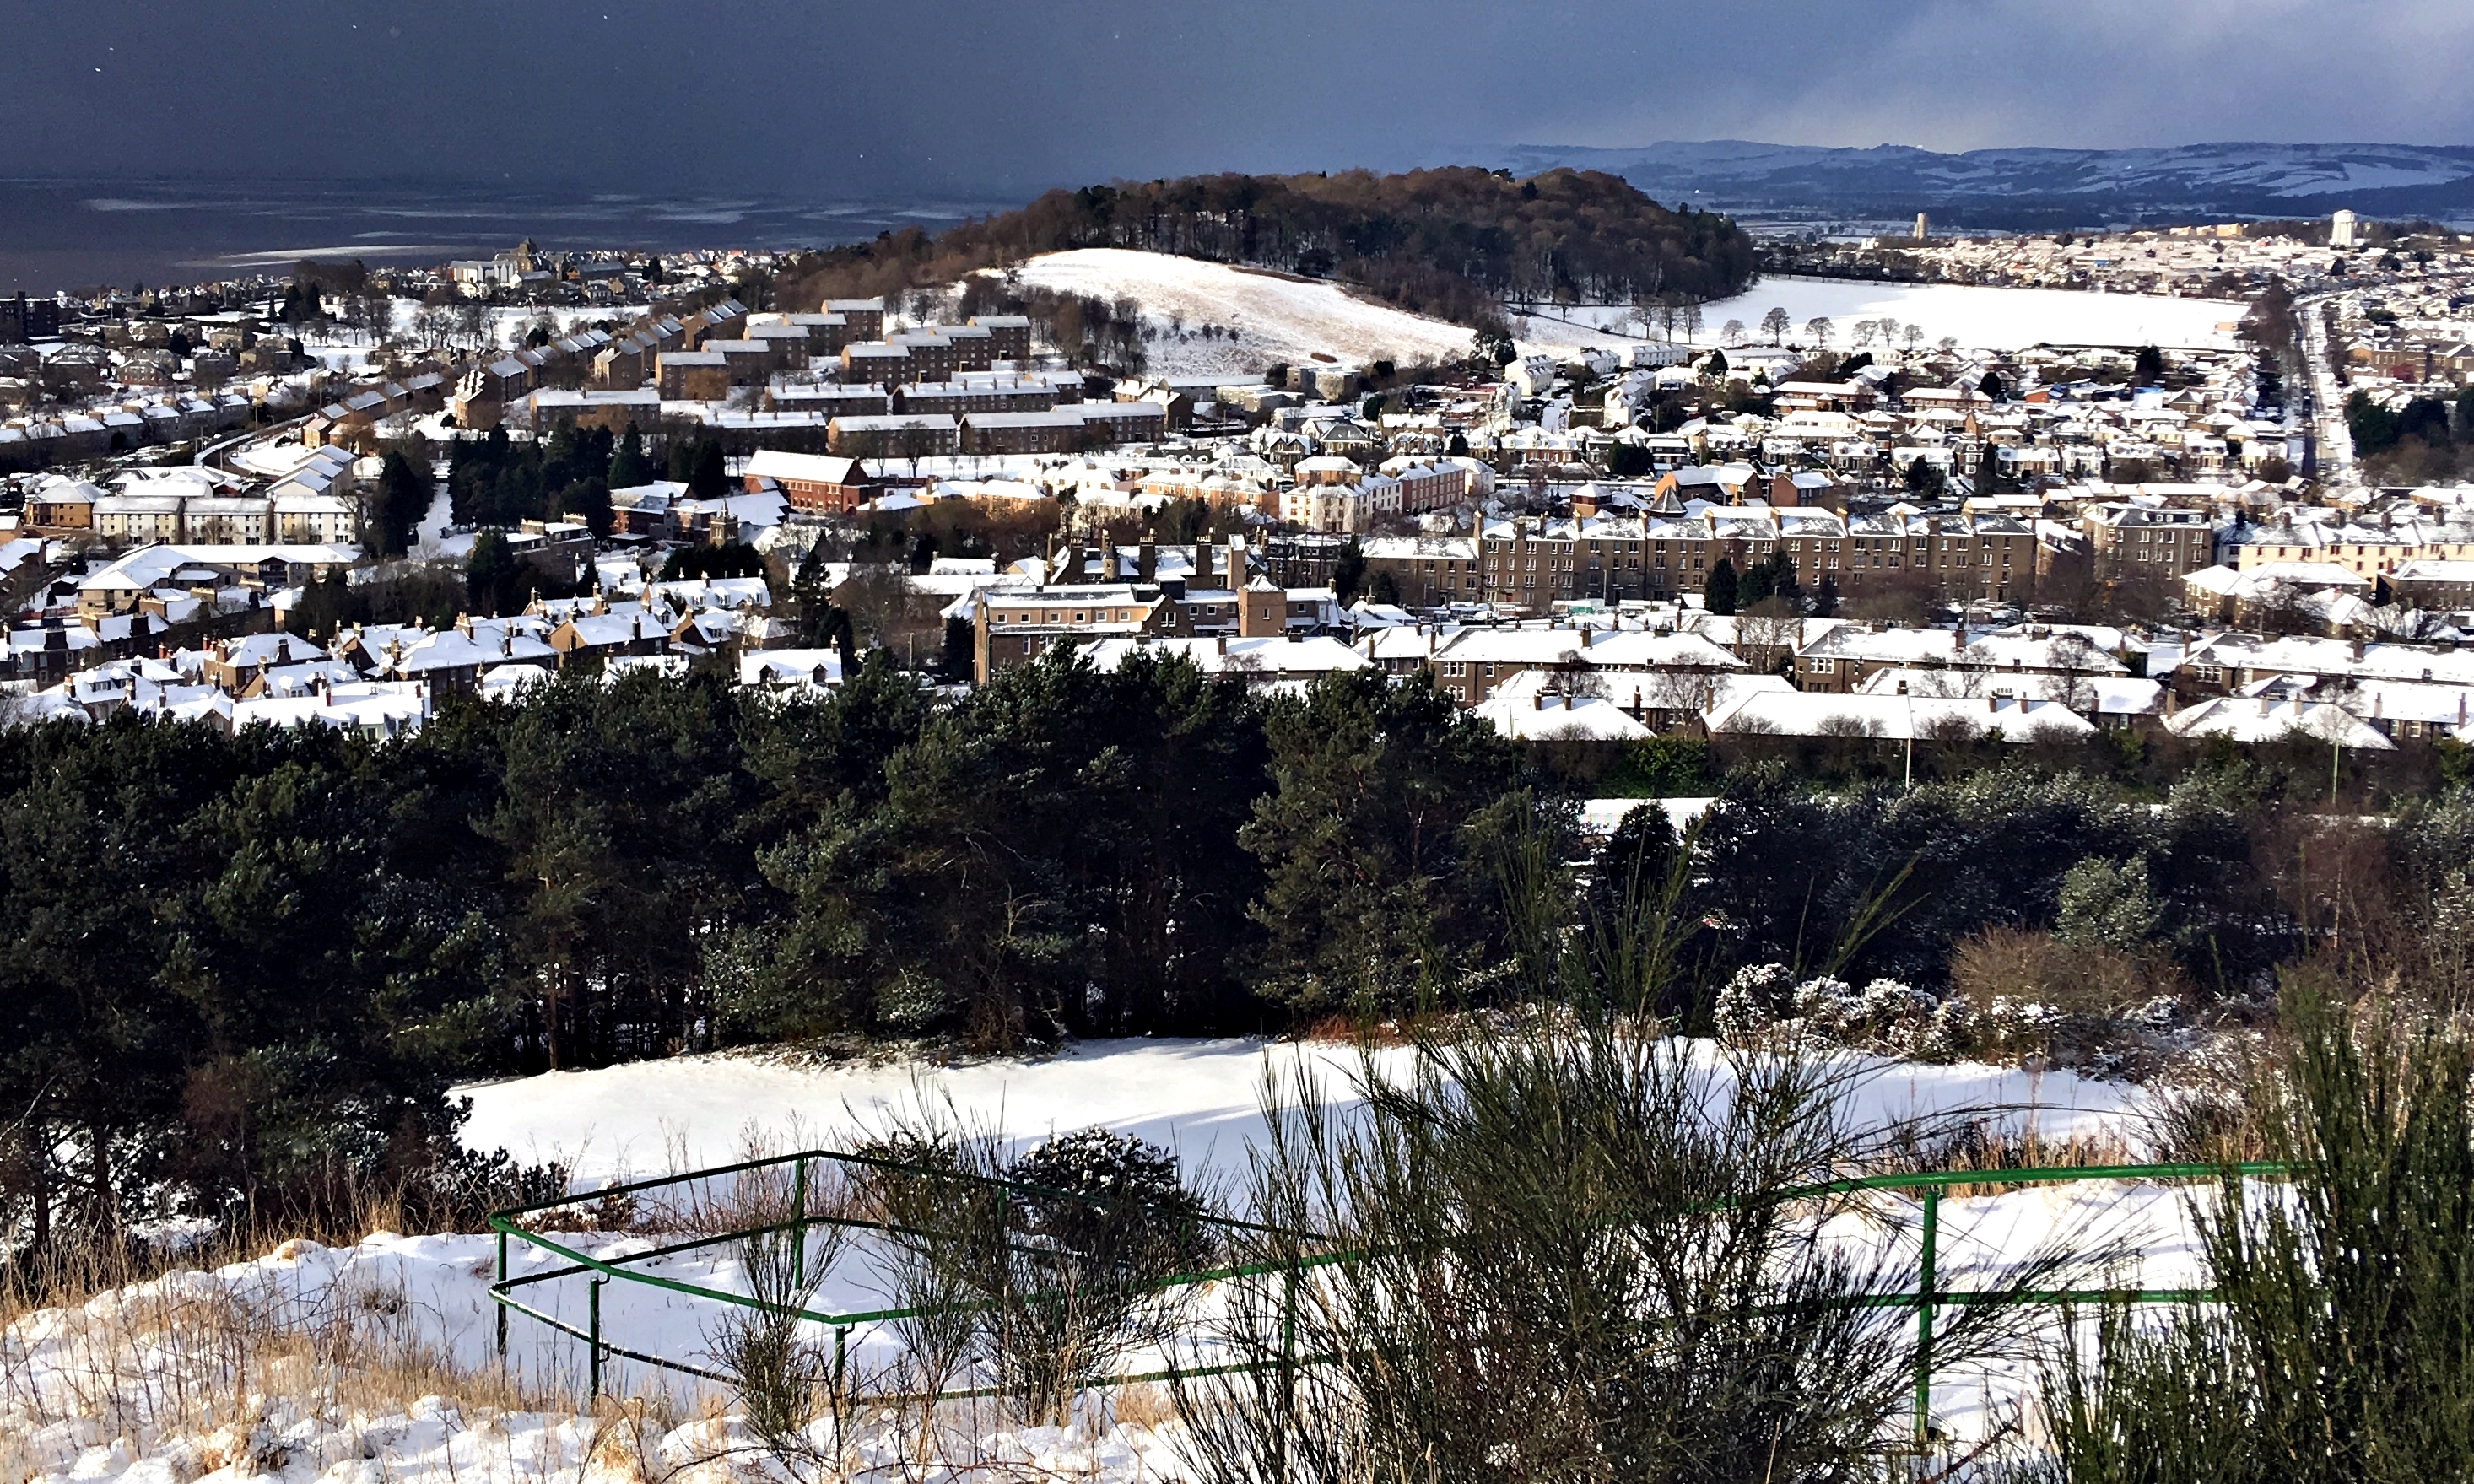 Snowy scenes across the west of Dundee, viewed from the top of The Law.